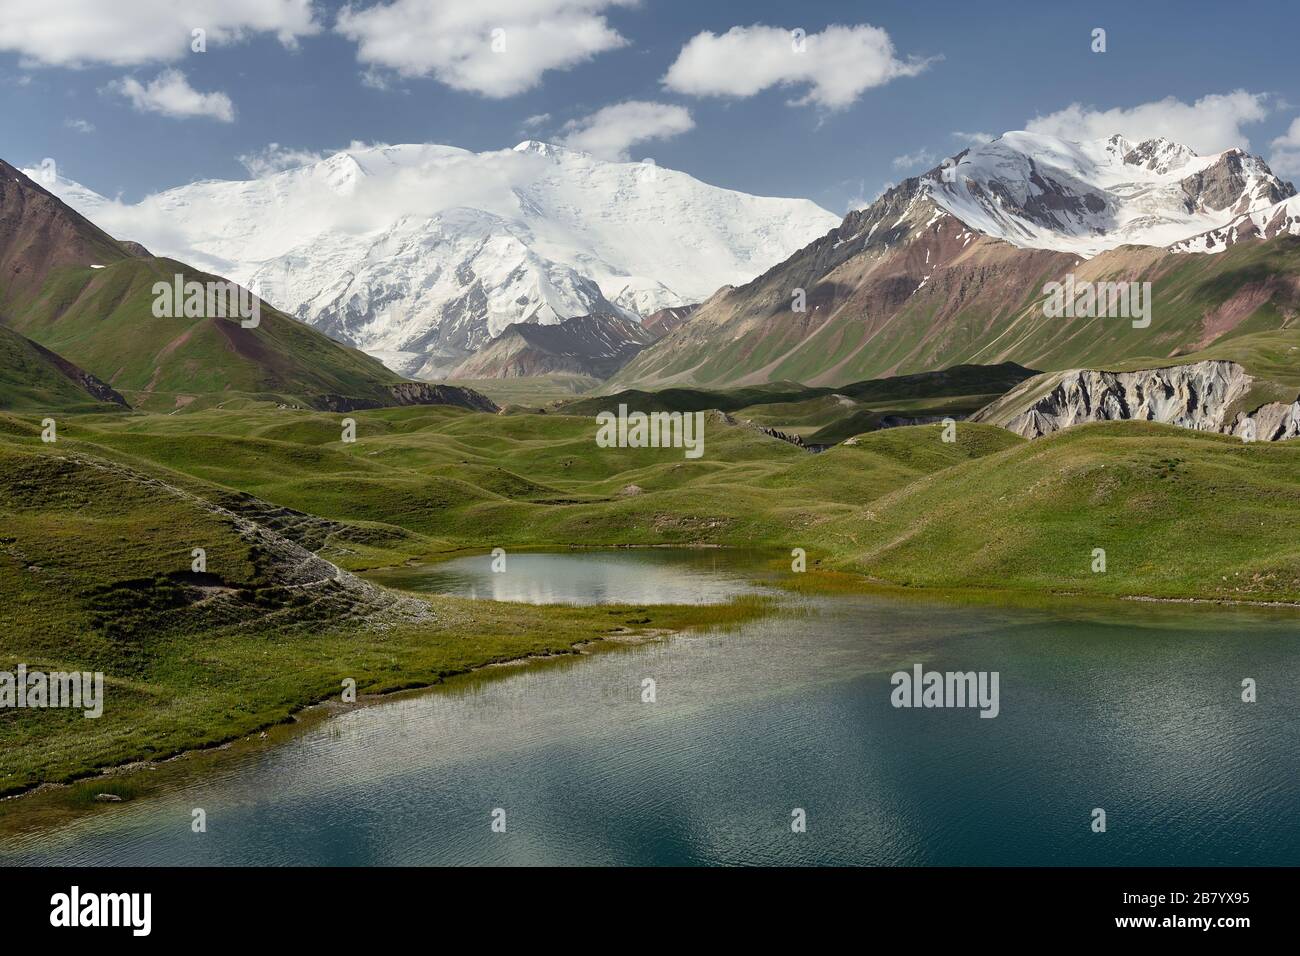 The beautiful Pamir mountains, trekking destination. View the Lenin Peak in the lake reflection, Kyrgyzstan, Central Asia. Stock Photo